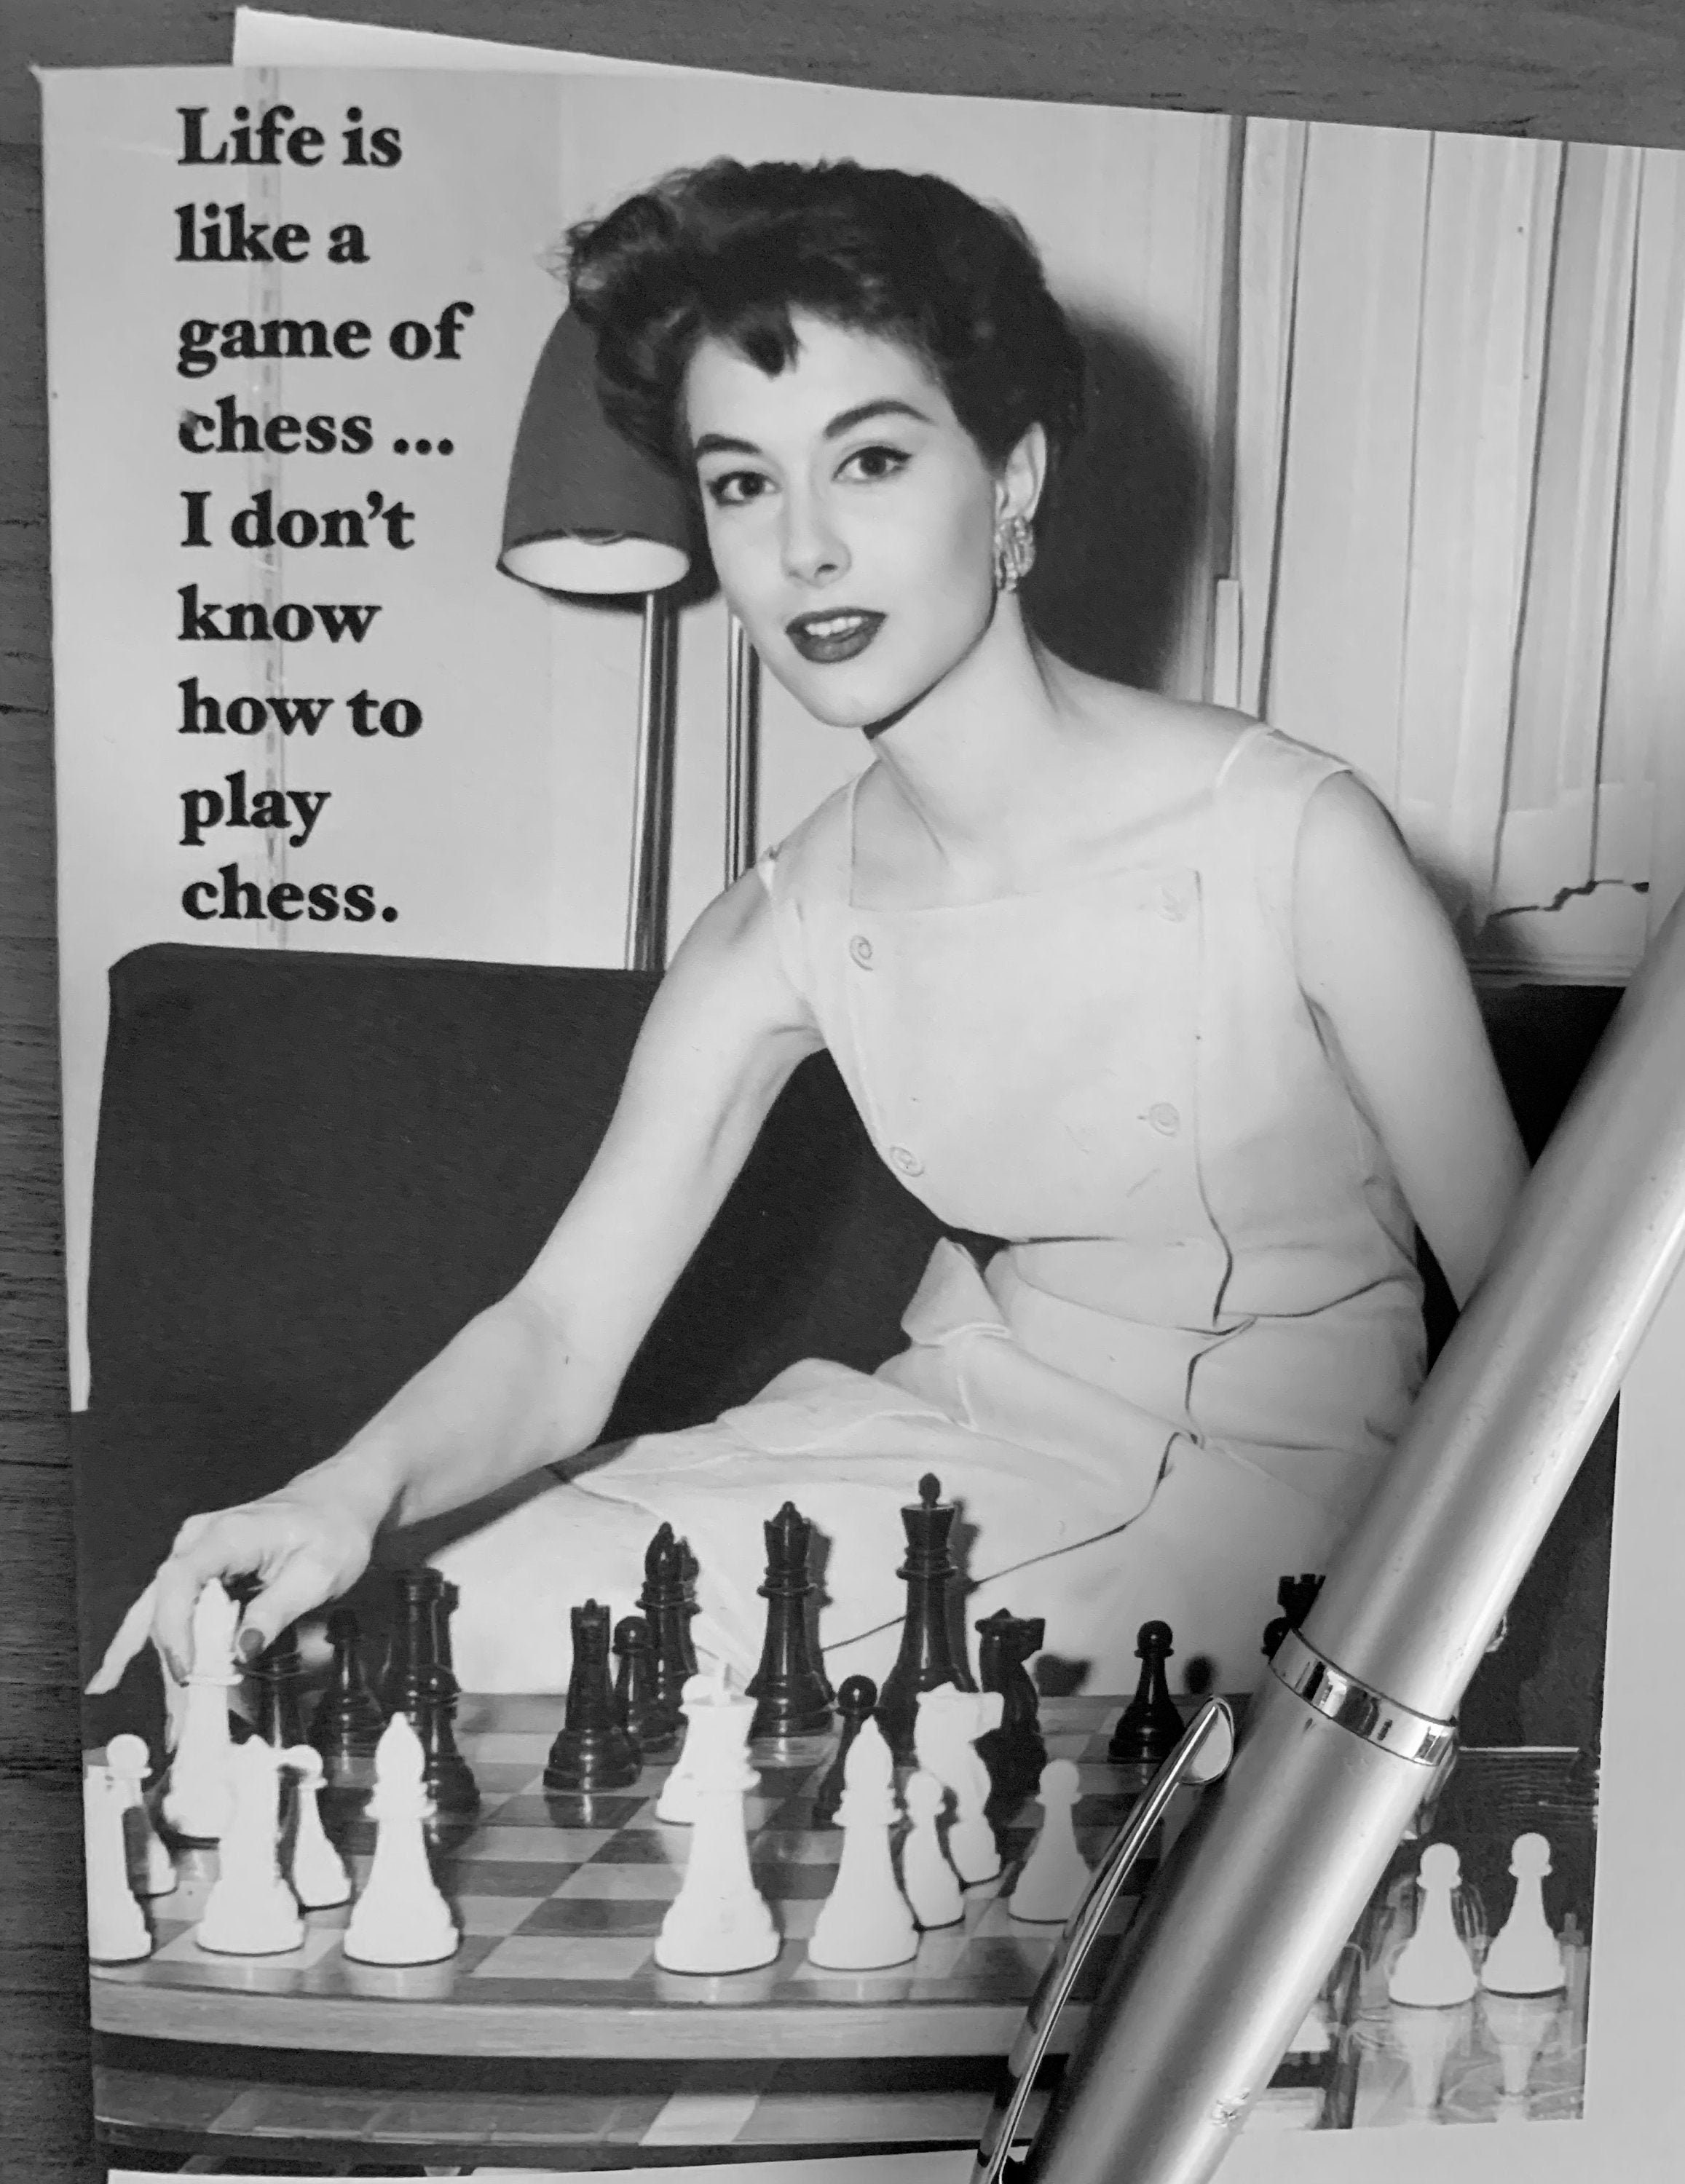 Life isn't a chess game